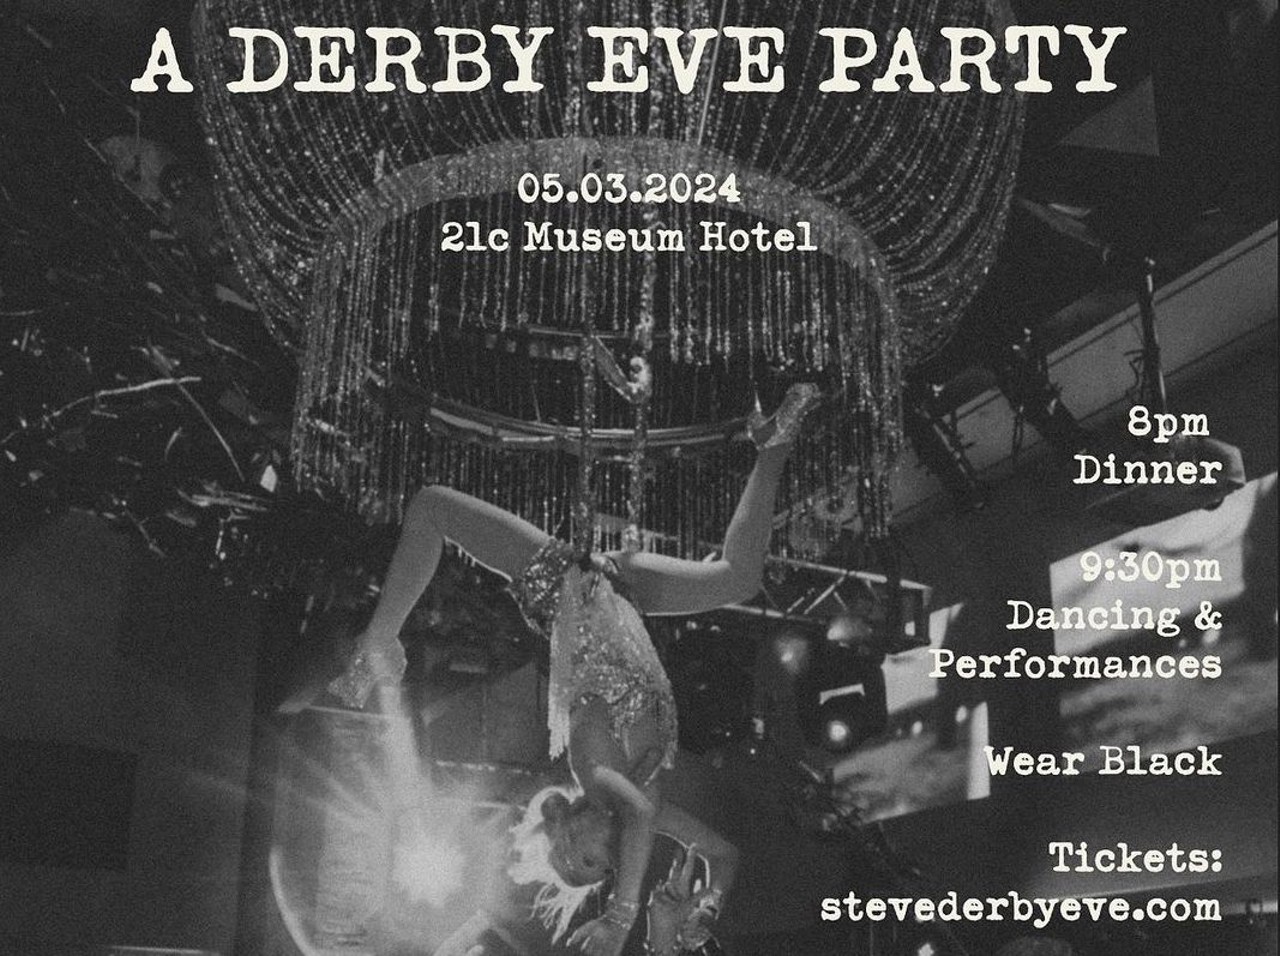 Derby Eve Party
Friday, May 3
21C | $250+ | 8 p.m. | 21+Befitting the celebration of the 150th Kentucky Derby, Steve Wilson is producing a unique and thrilling party benefiting the Kentucky college of Art and Design. Well-known for his Derby events over the years, he promises this will be the most thrilling of all.Guests will be requested to wear black and they will all be given white eye masks so every person attending will become an actor in a dark room of mystery. Lost in a mysterious room of artists and performers that will ensue an evening narrow to be forgotten. Steve said, “ when it’s all over and my friends are at the Derby or wherever they might be on Saturday, I want them to wonder, was that real or a dream?”